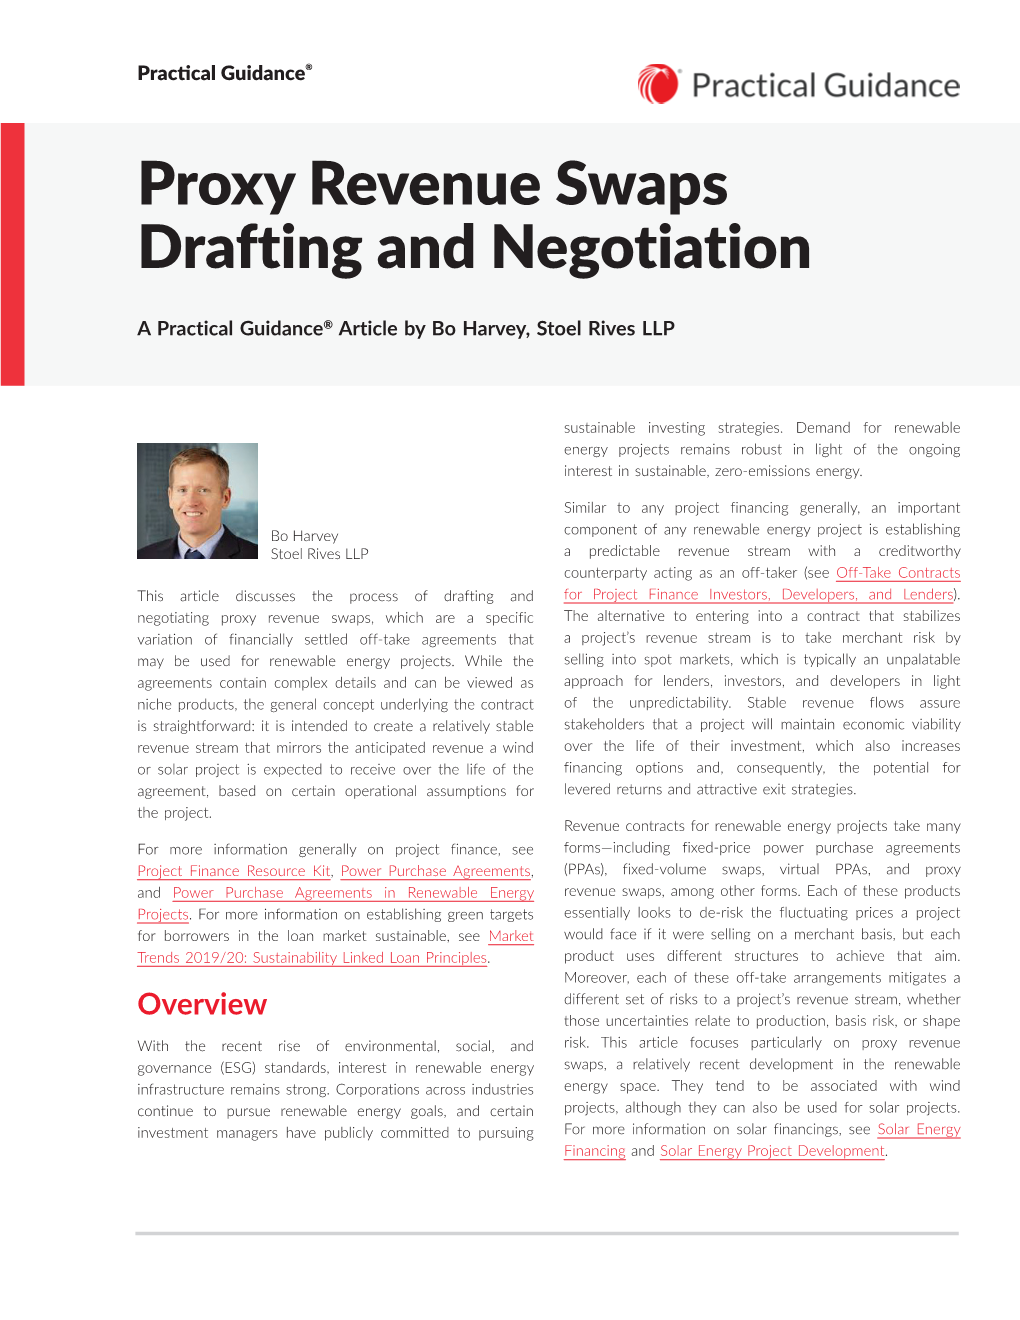 Proxy Revenue Swaps Drafting and Negotiation